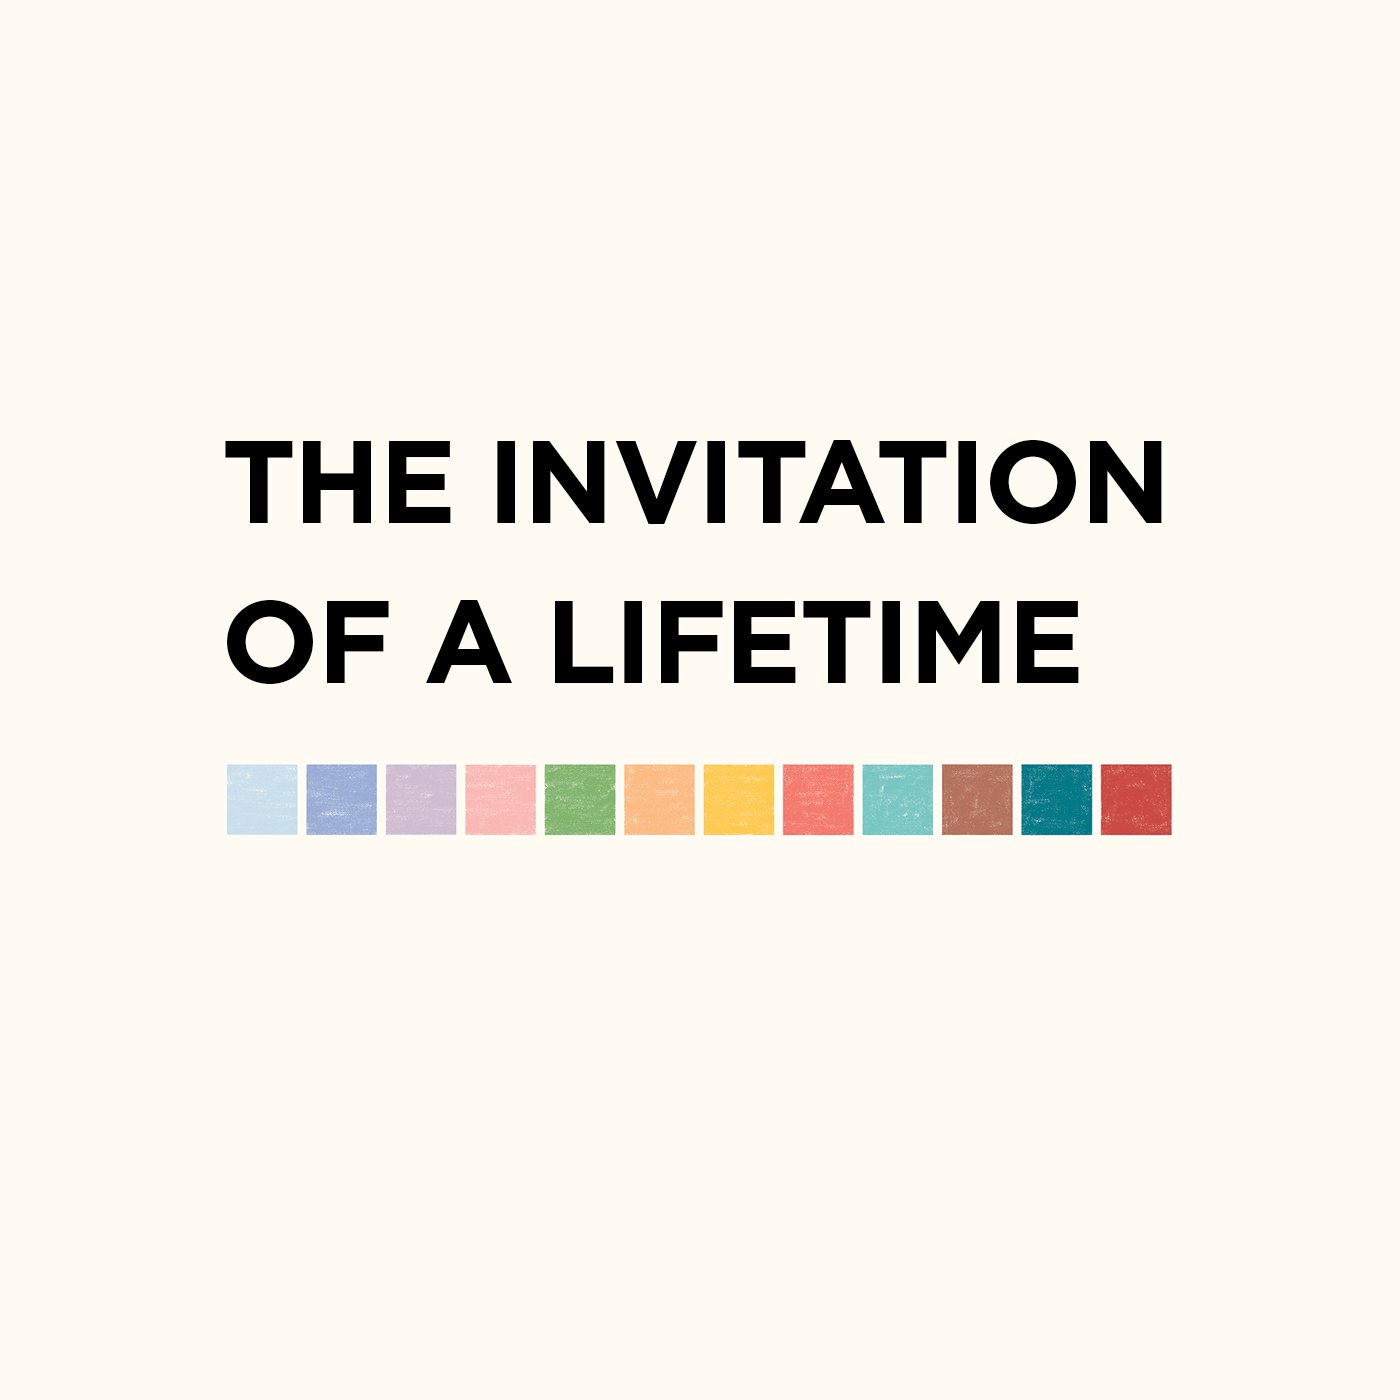 The Invitation of a Lifetime